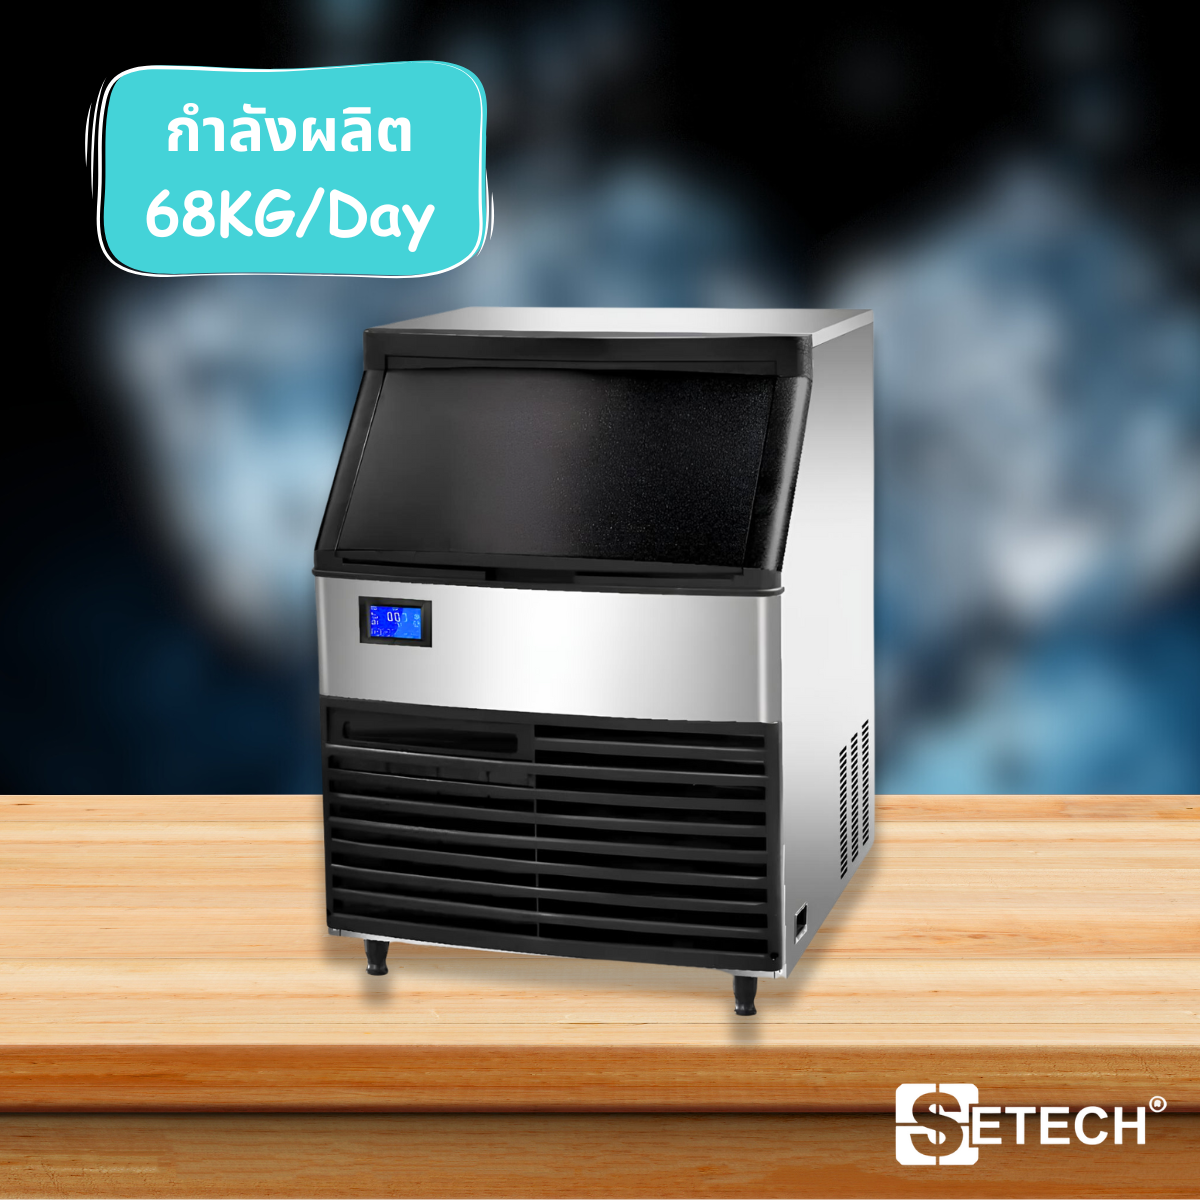 Ice maker 460w Setech production capacity 68KG per day IC-04 